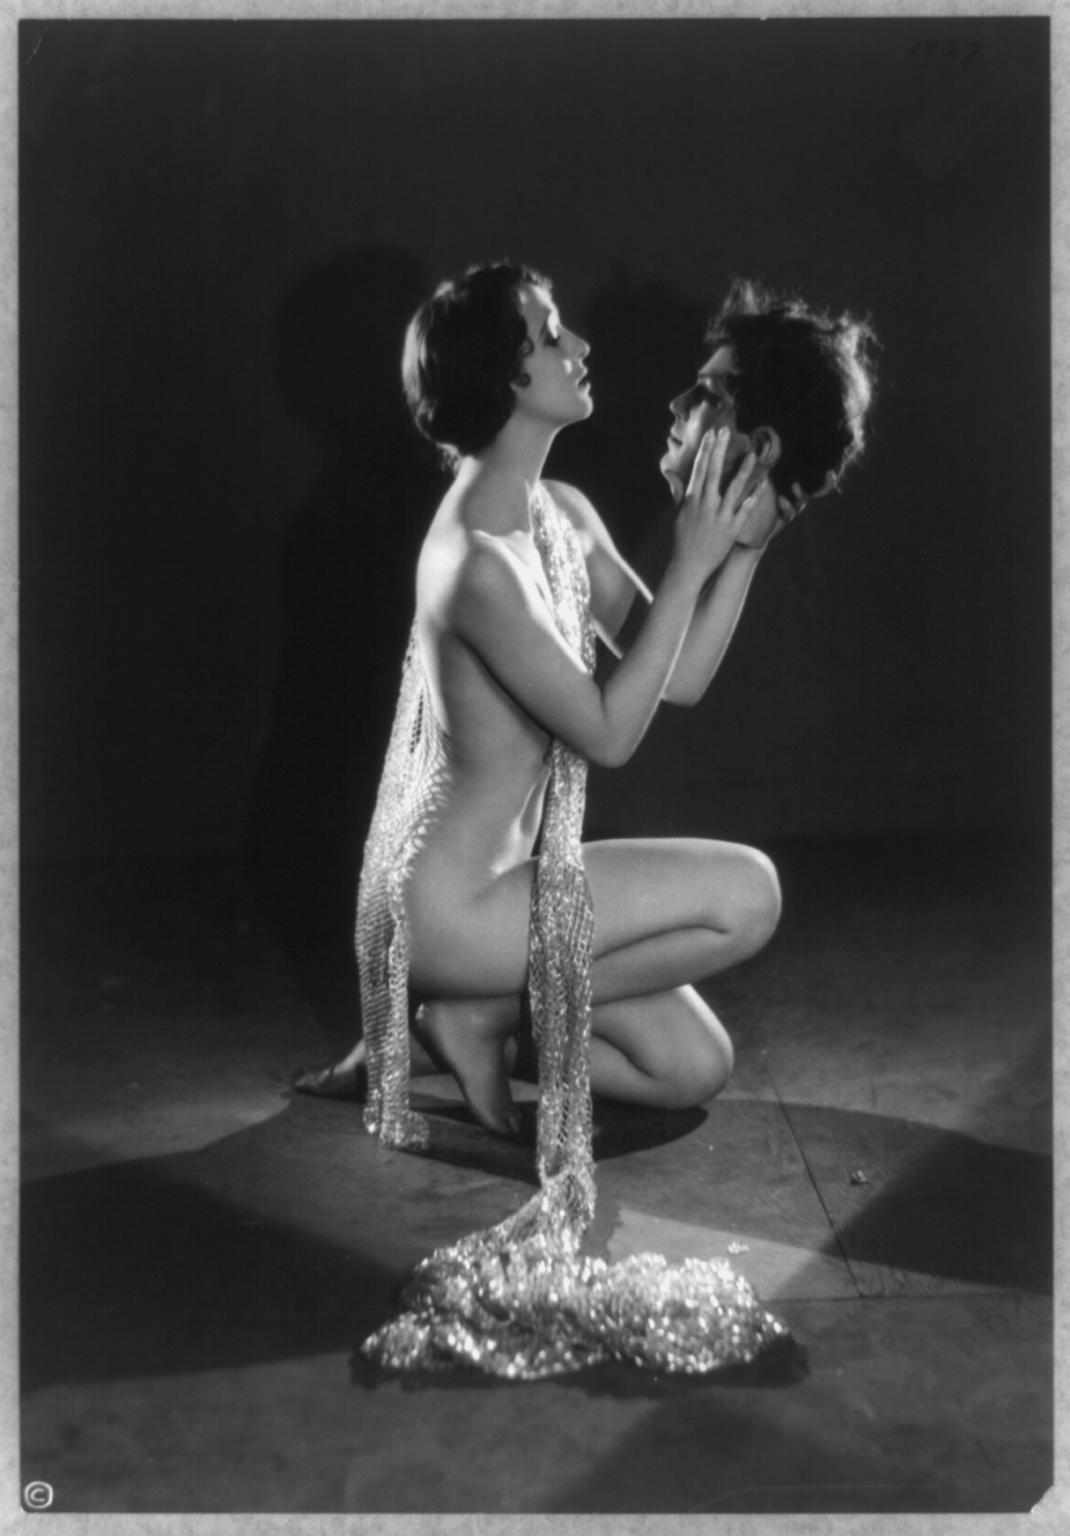 Model Kathryn Stanley holds a prop head for an artistic picture in 1926. The picture is done by Edwin Bower Hesser who helped redefine art, sex appeal, and imagination in the 1920s. Look him up, his unique grasp on photography, art, and the beauty, especially of women, was ahead of its time.